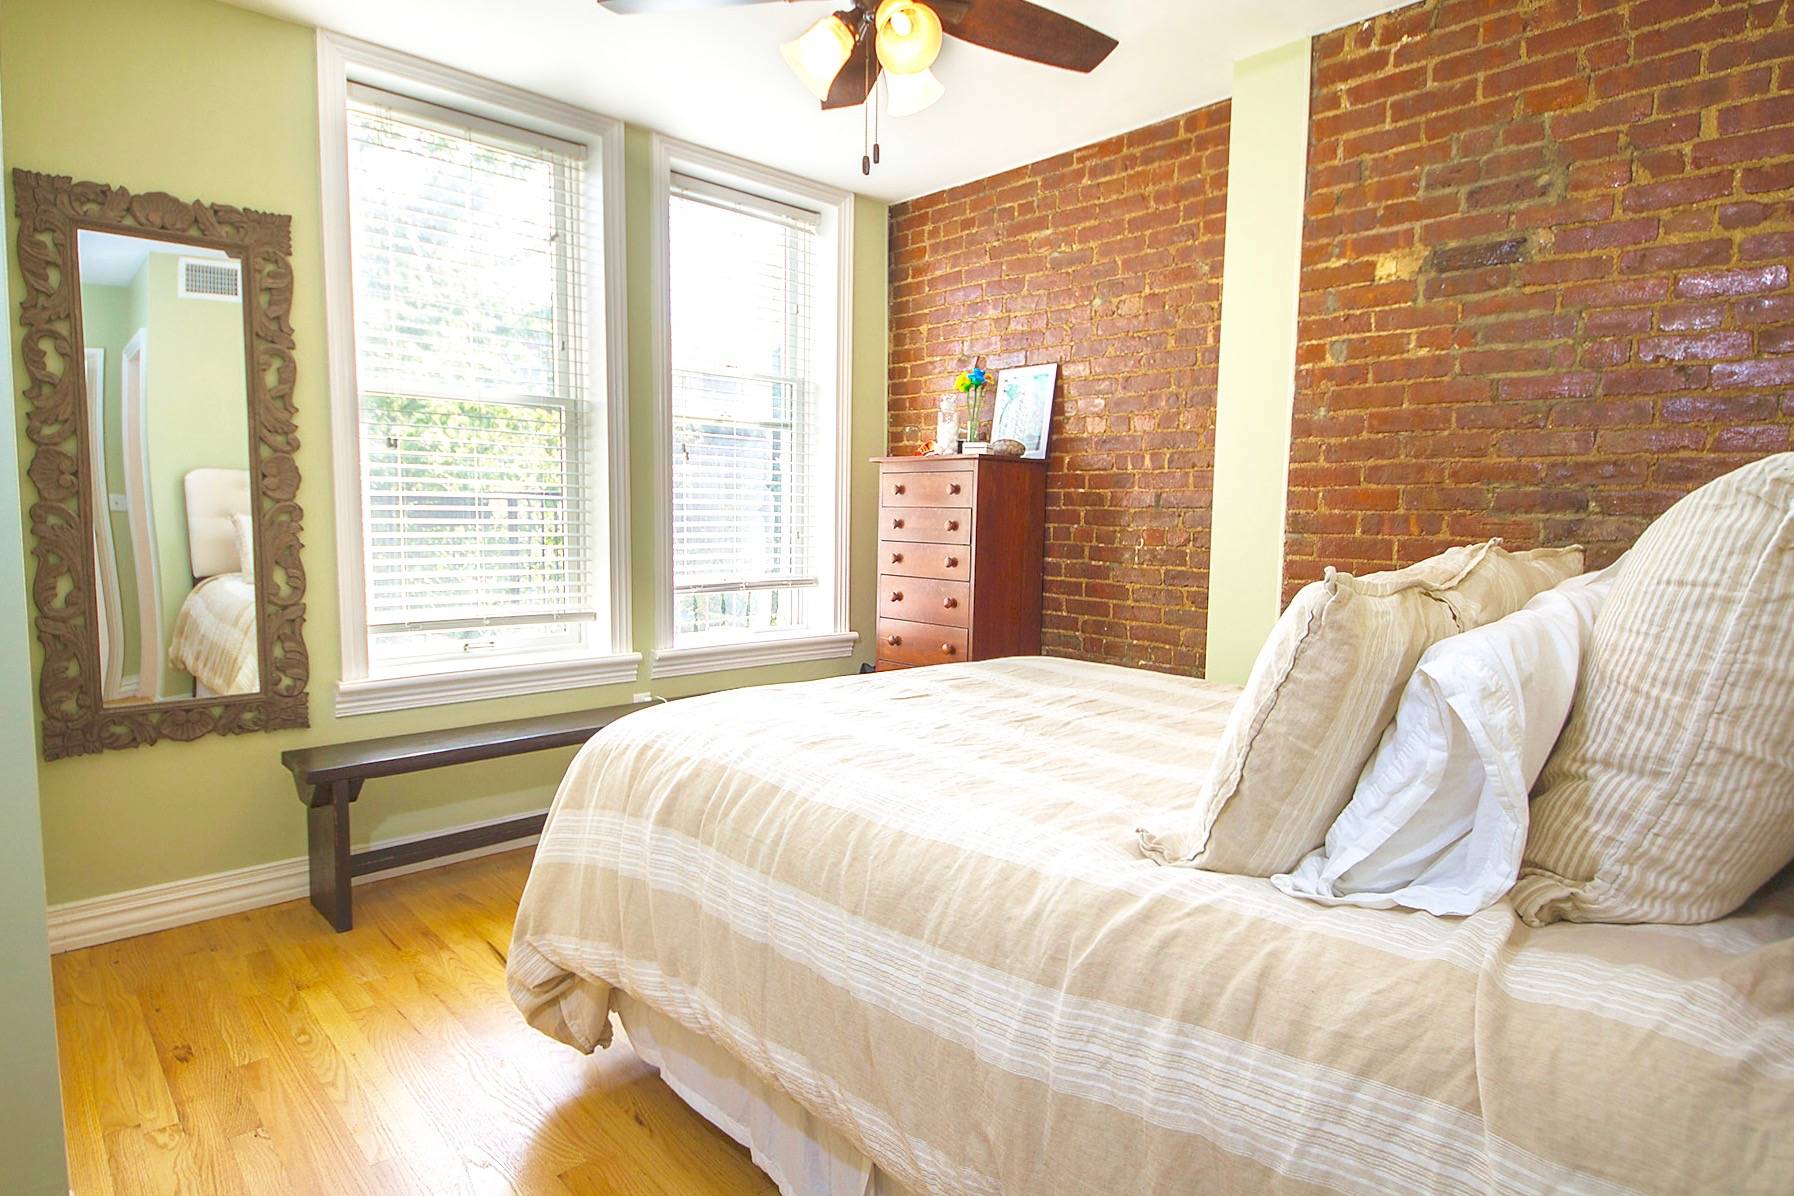 2 Bedroom / 2 full Bath on 8th & Willow in Hoboken available now